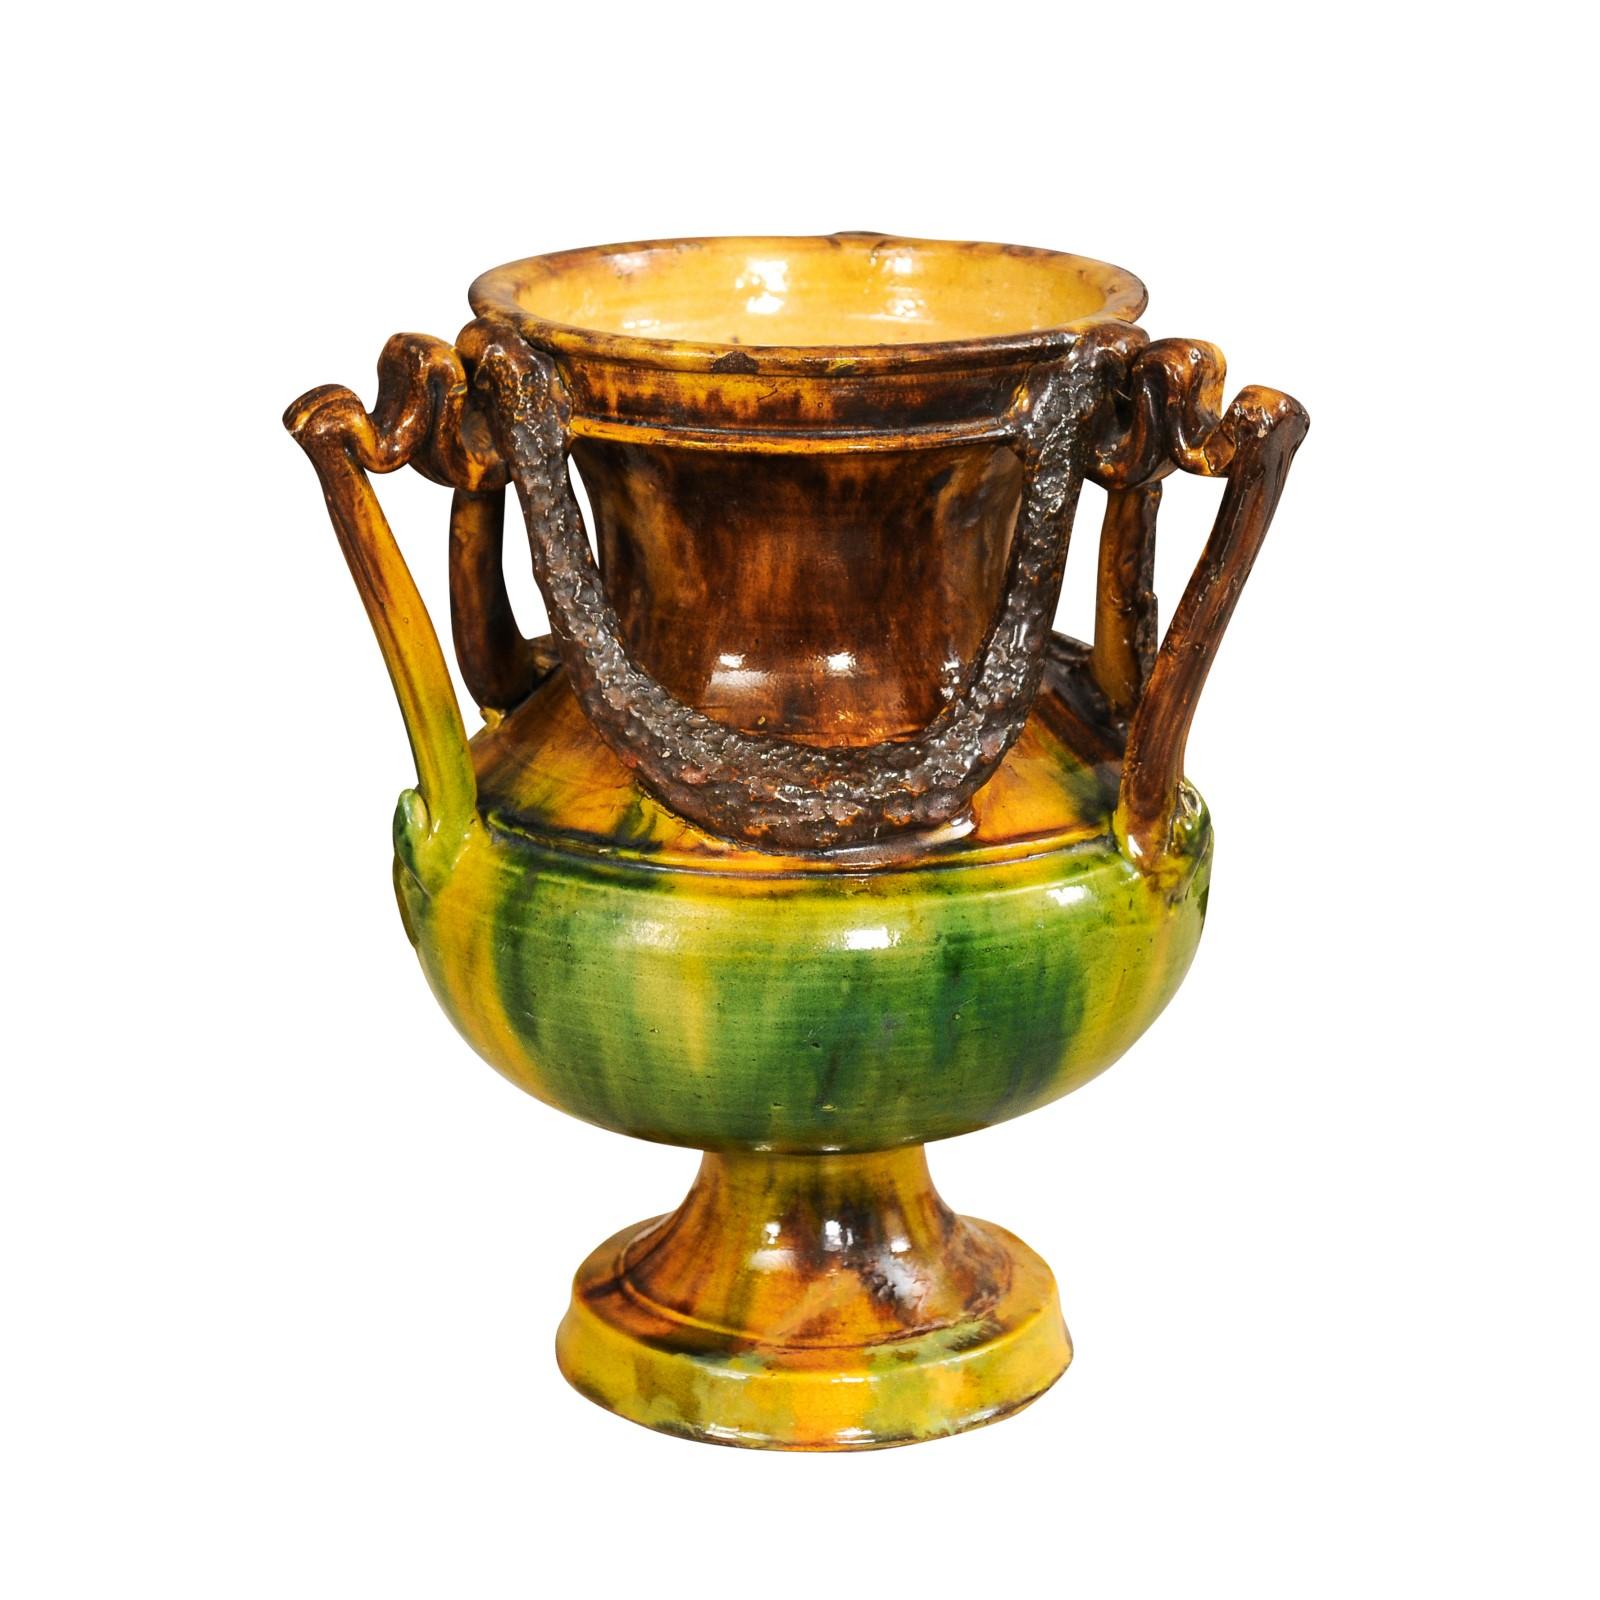 French Classical 19th Century Anduze Multi-Colored Glazed Vase with Swag Motifs For Sale 4